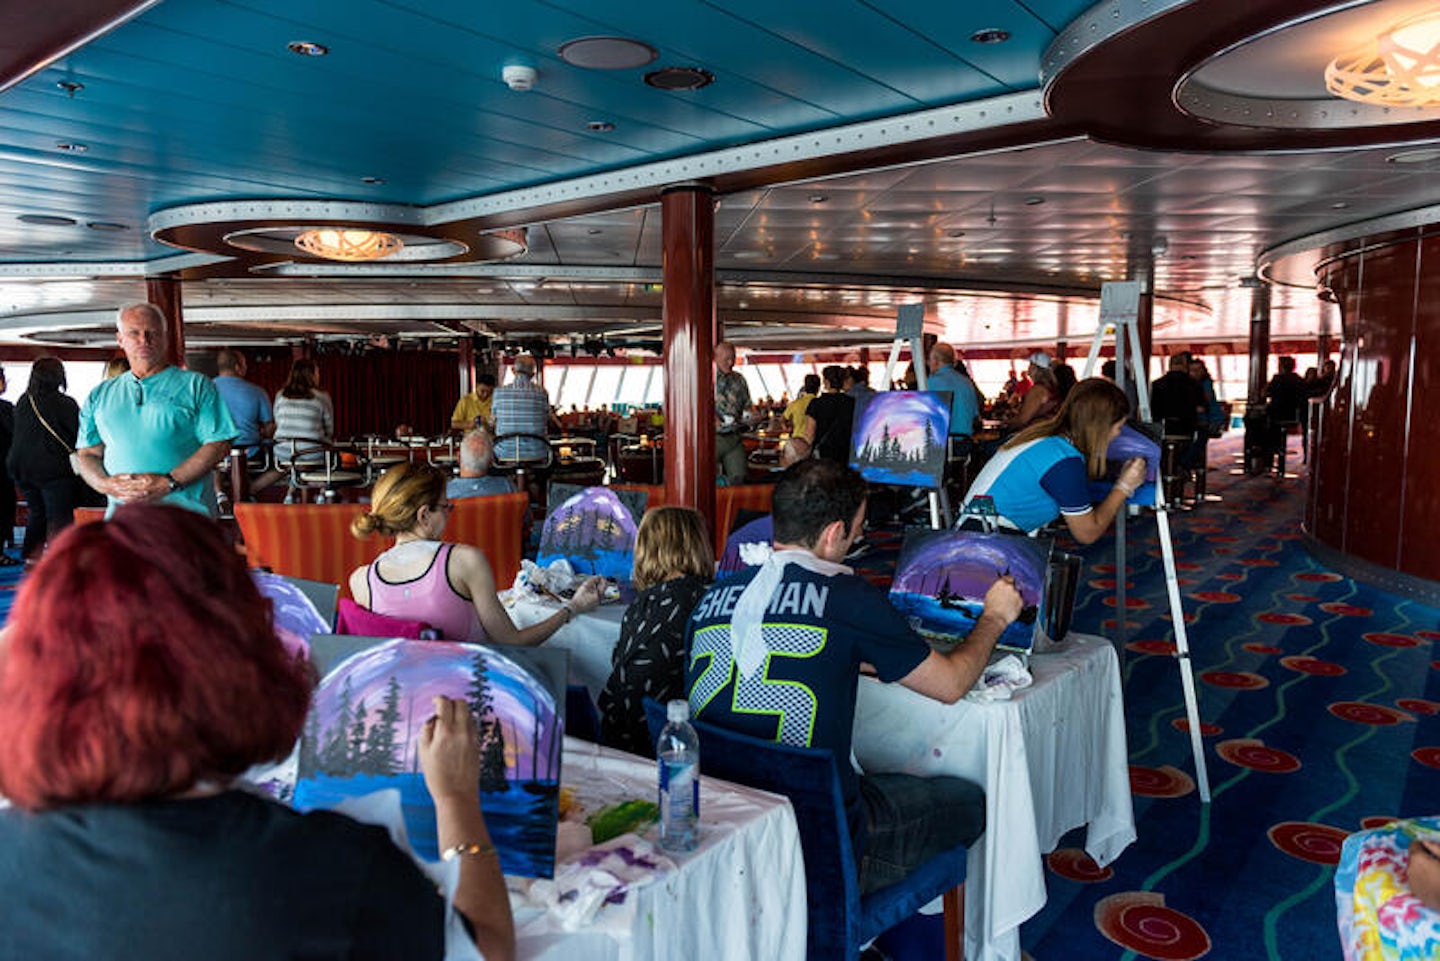 Painting Class at Spinnaker Lounge on Norwegian Pearl